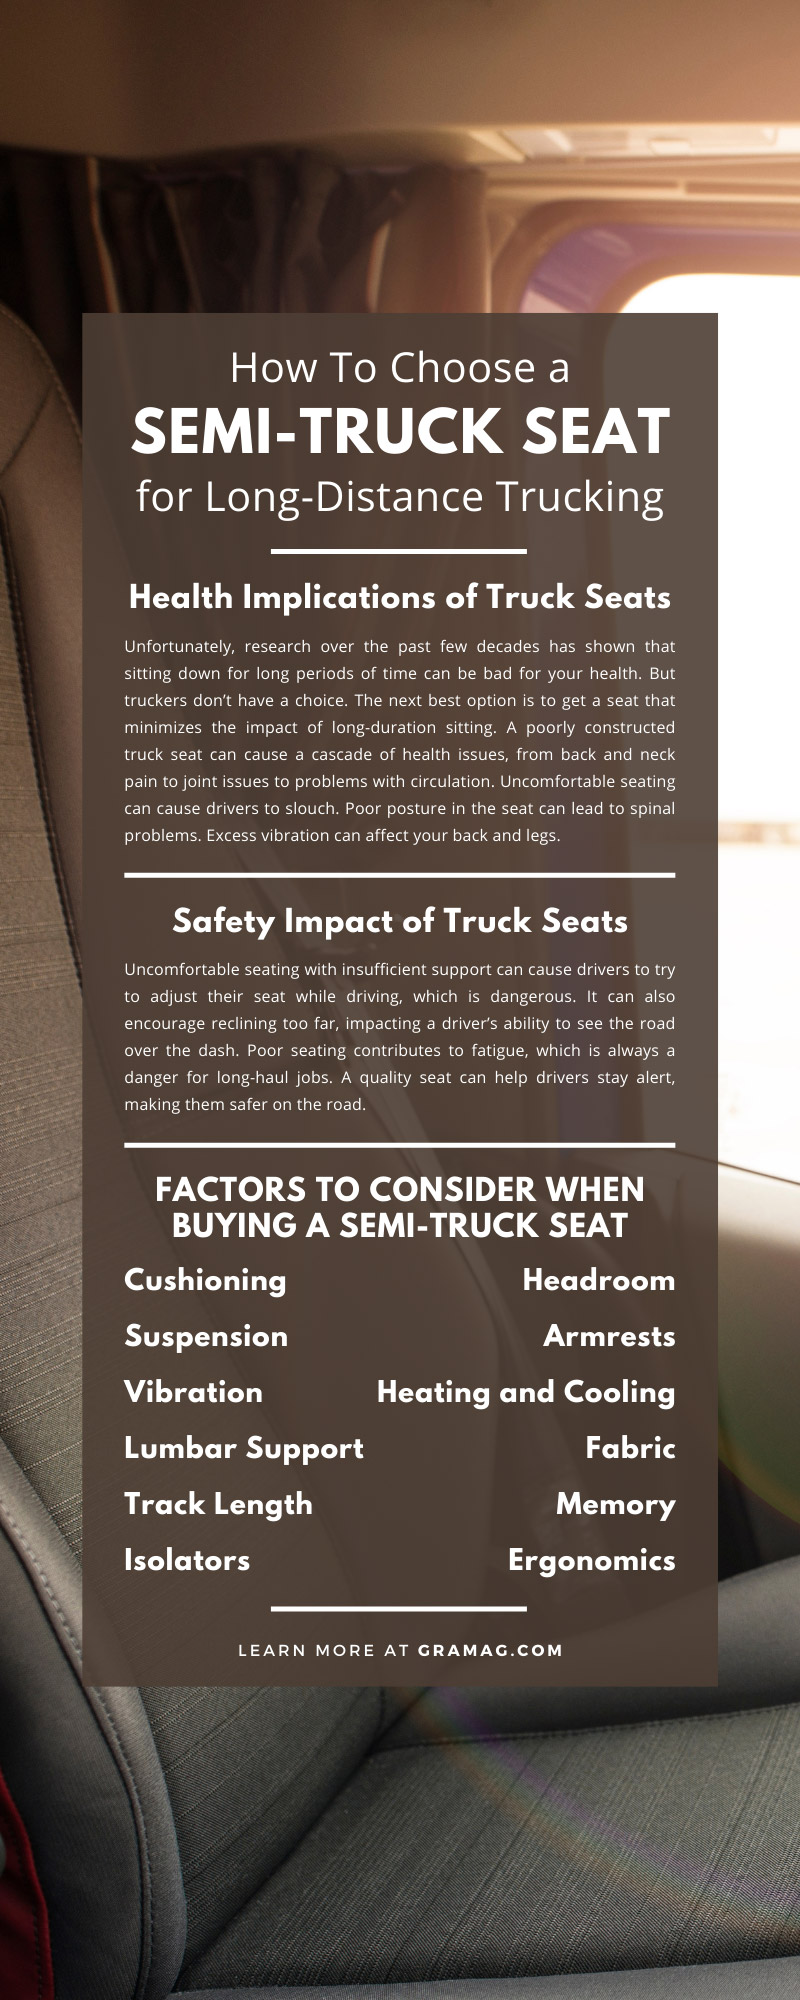 How To Choose a Semi-Truck Seat for Long-Distance Trucking